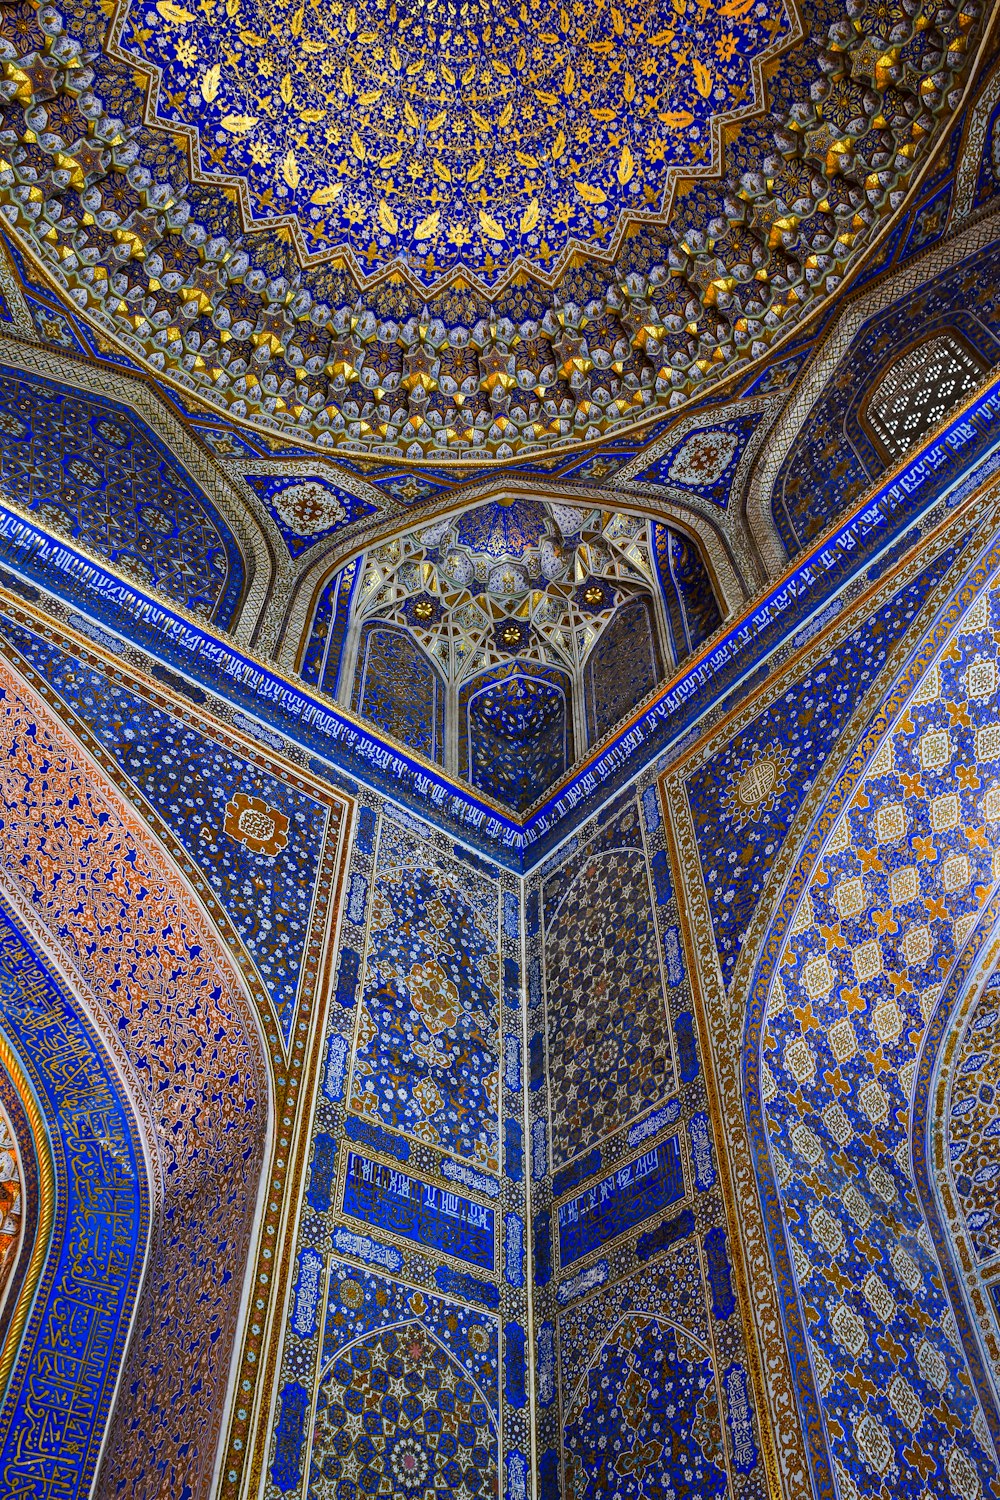 the ceiling of a building with blue and gold designs